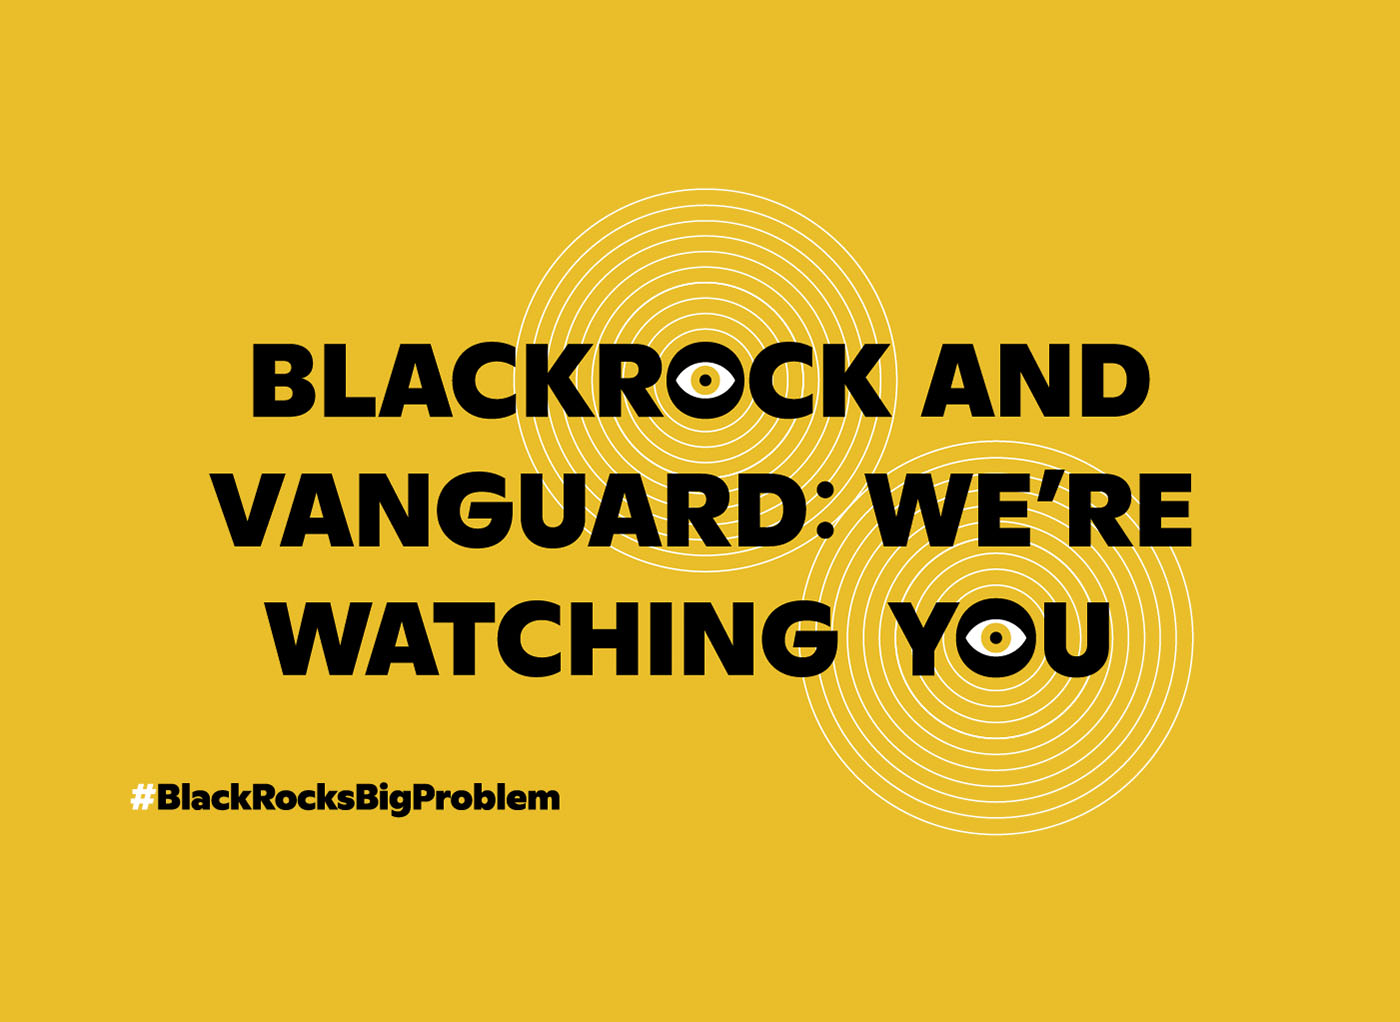 text reading BlackRock and Vanguard we're watching you. The O in BlackRock and You has been replaced with eyes.